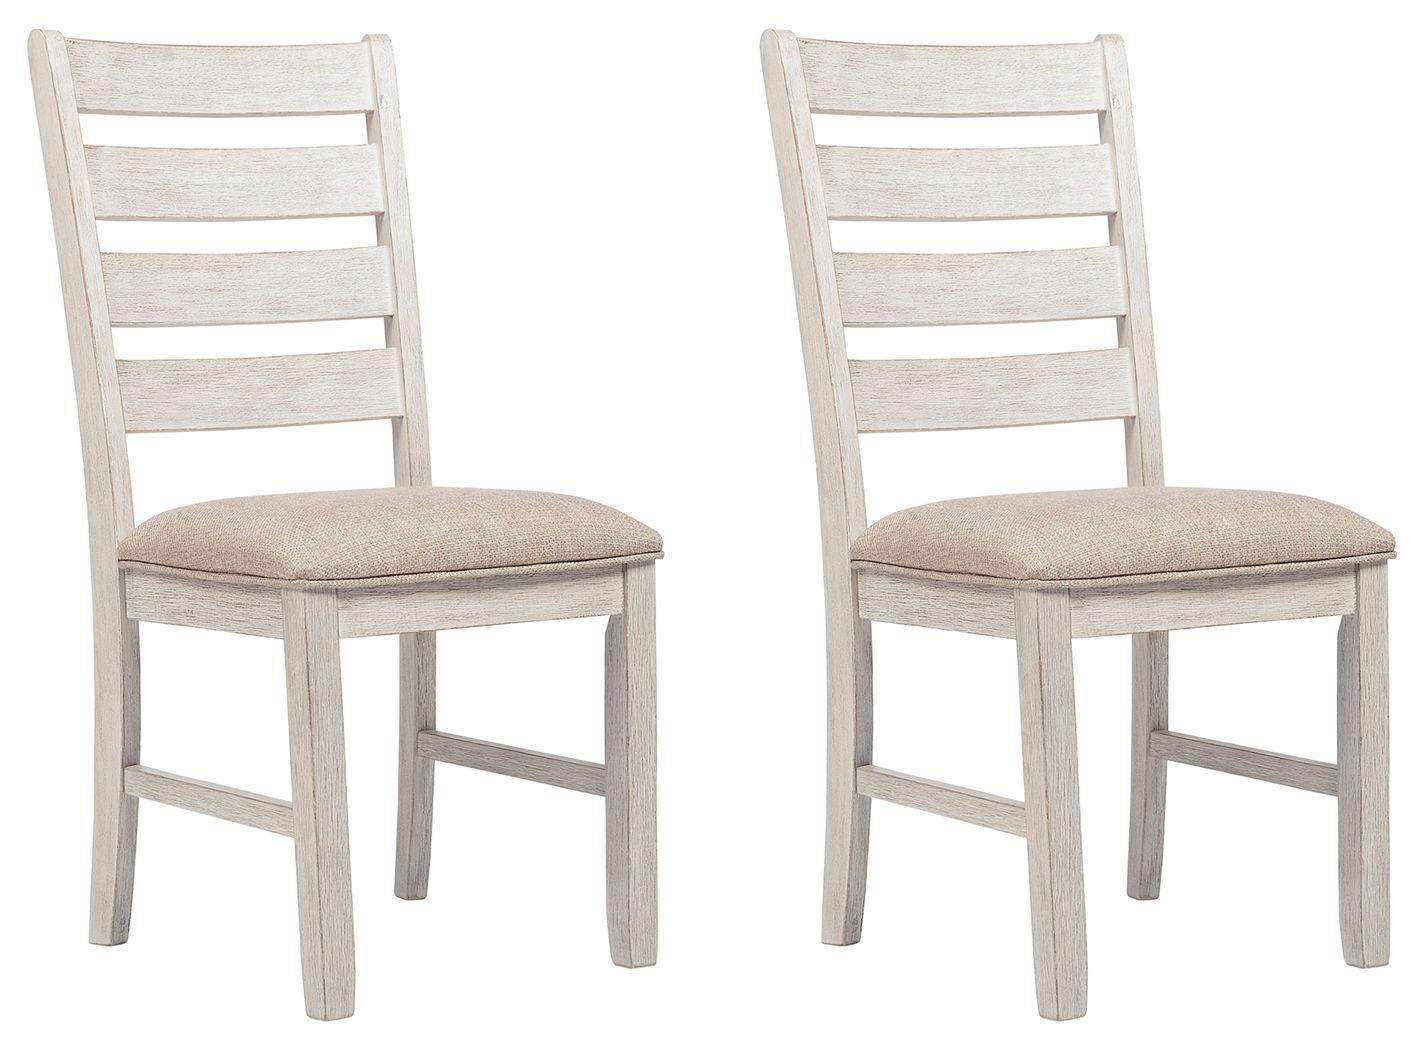 Signature Design by Ashley® - Skempton - White - Dining Uph Side Chair (Set of 2) - 5th Avenue Furniture